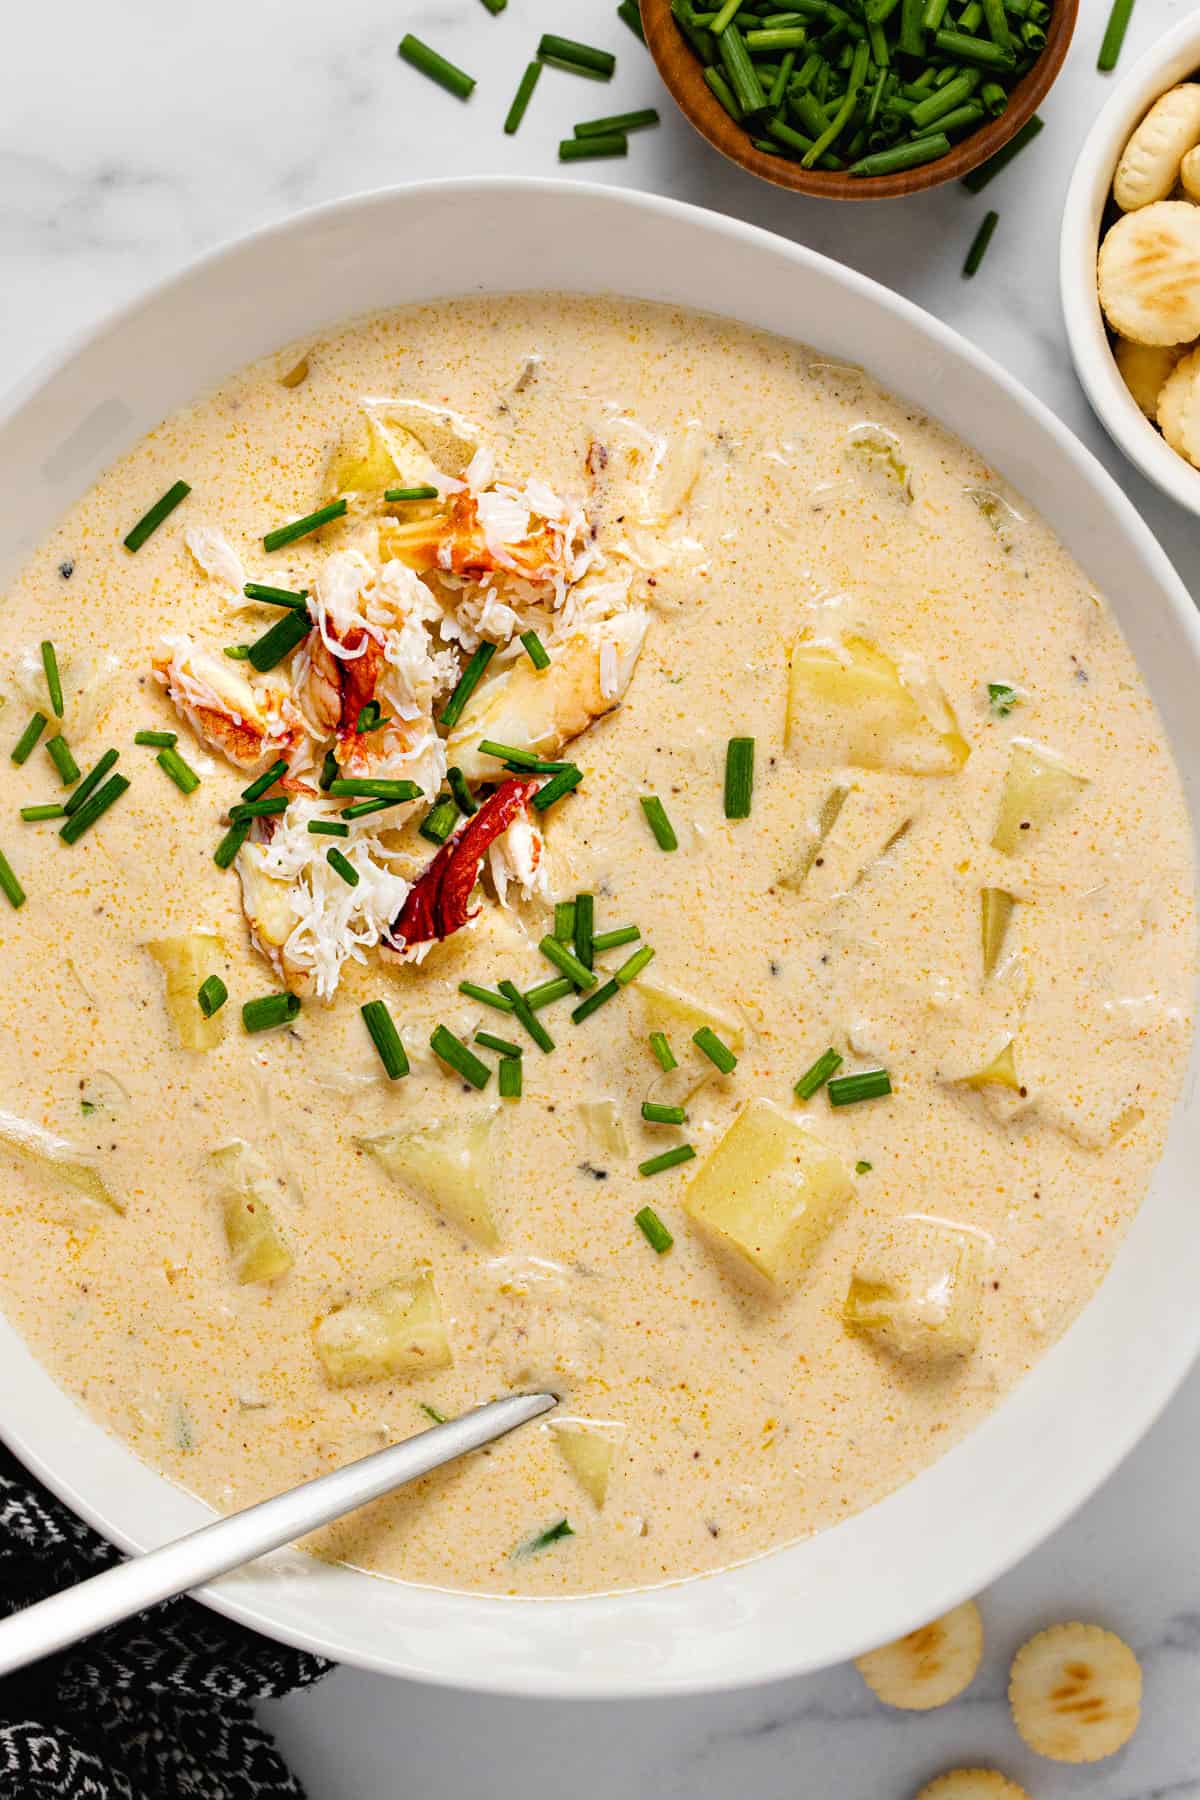 30 Minute One Pot Creamy Crab Soup - Midwest Foodie